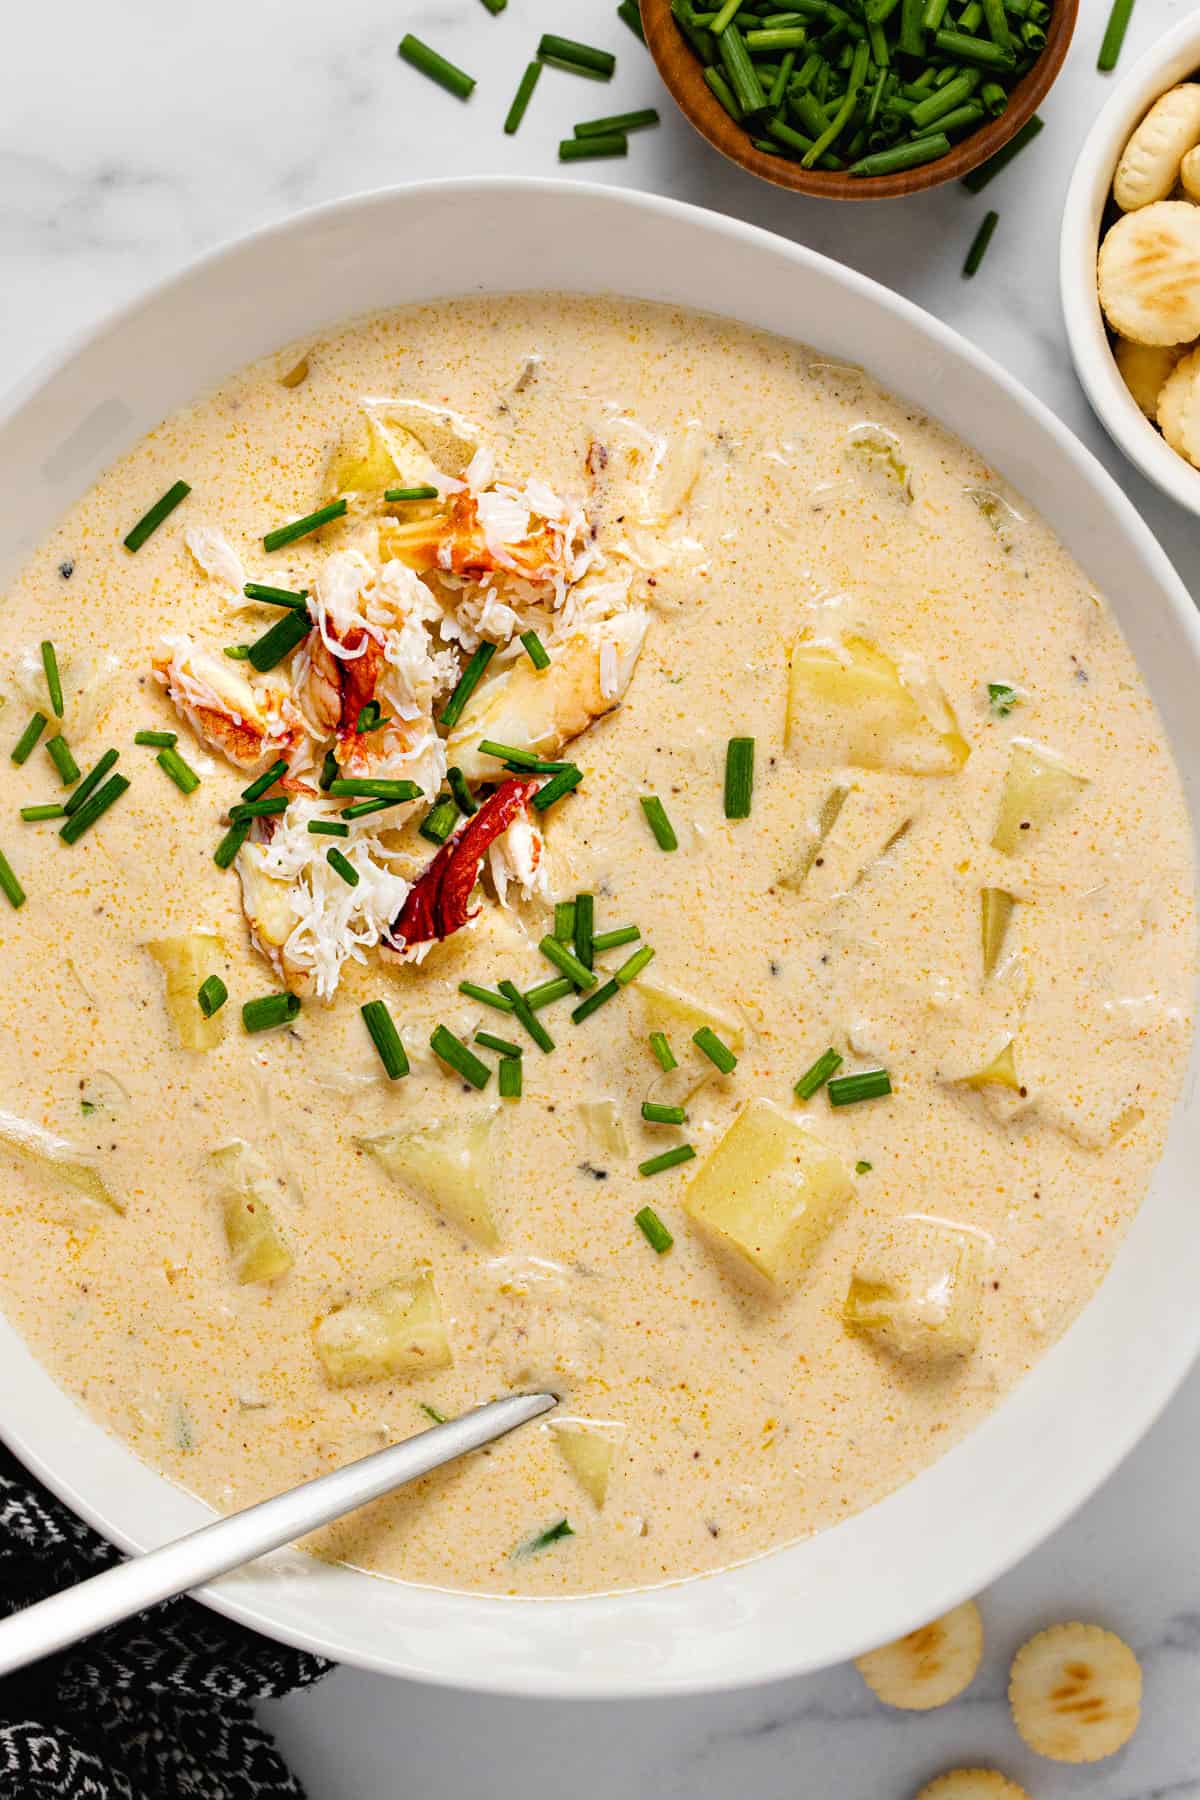 30 Minute One Pot Creamy Crab Soup - Midwest Foodie